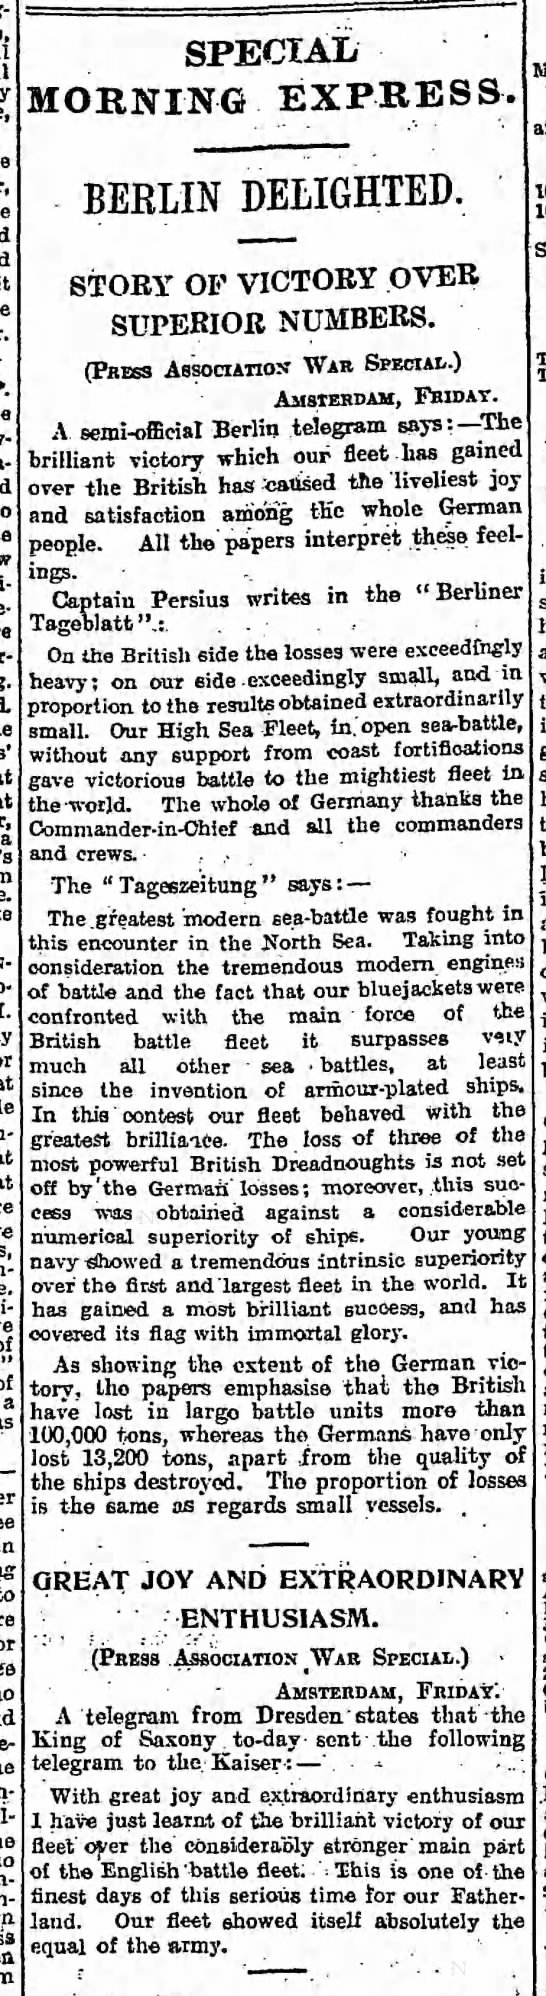 Germans announce victory over British at Battle of Jutland - 